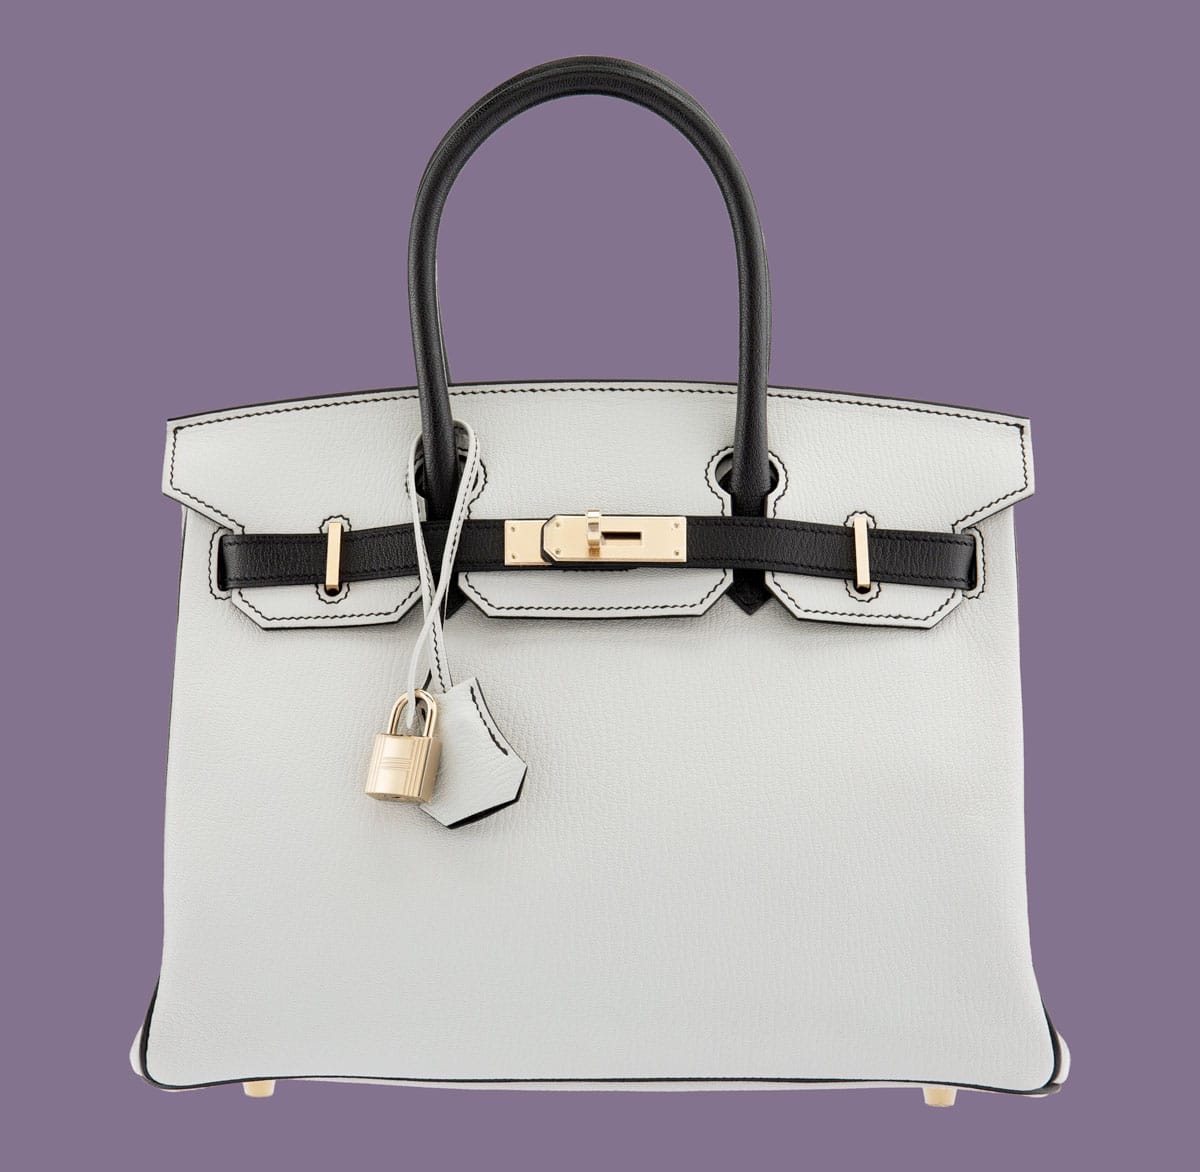 Hermes Special Order Horseshoe 30cm Gris Mouette Black Chevre Leather Birkin Bag with Permabrass Hardware